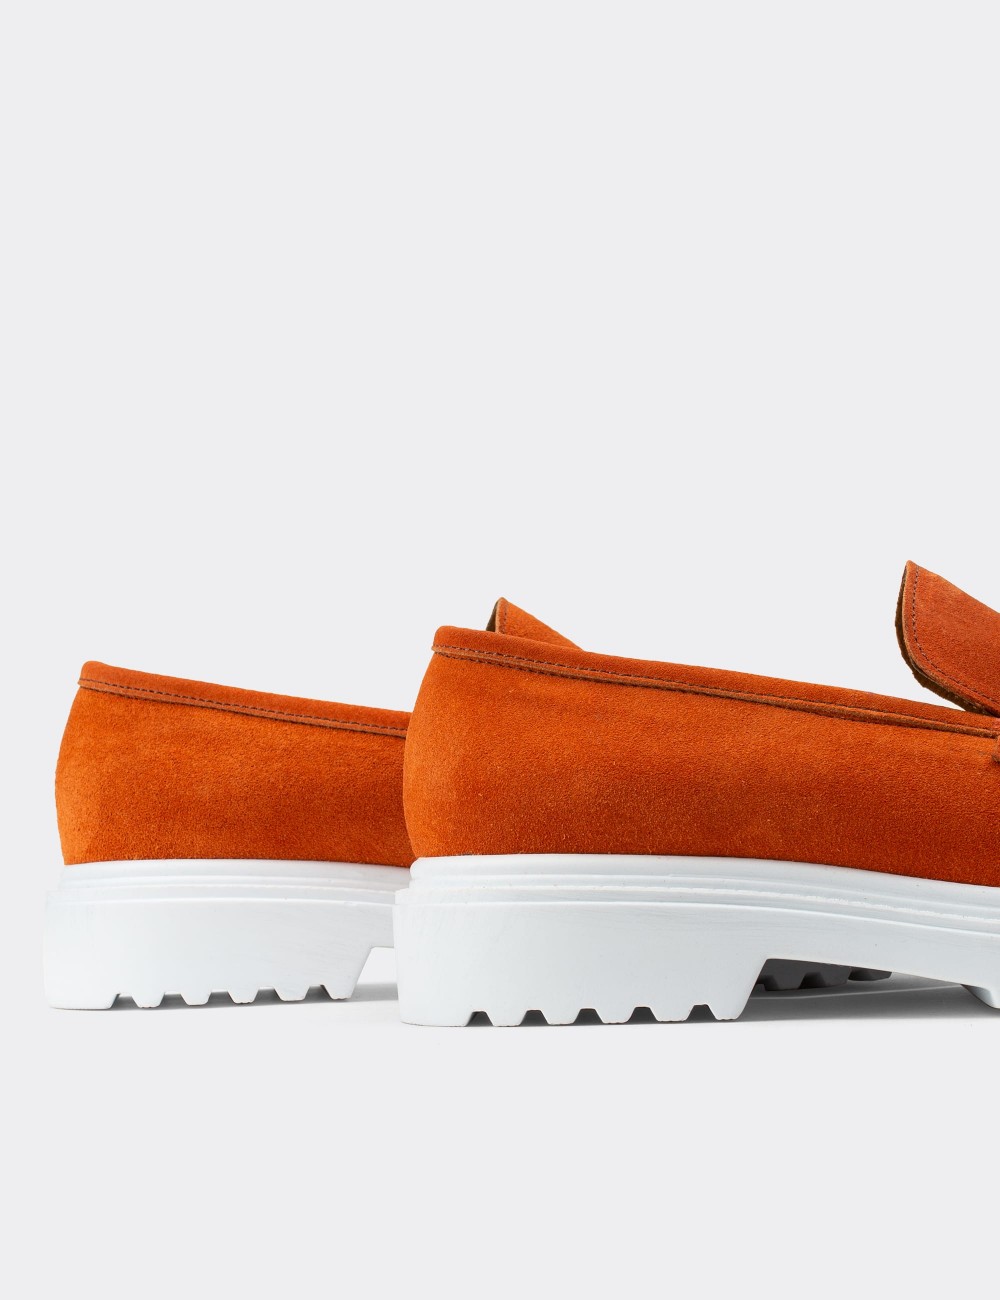 Orange Suede Leather Loafers - 01902ZTRCP01